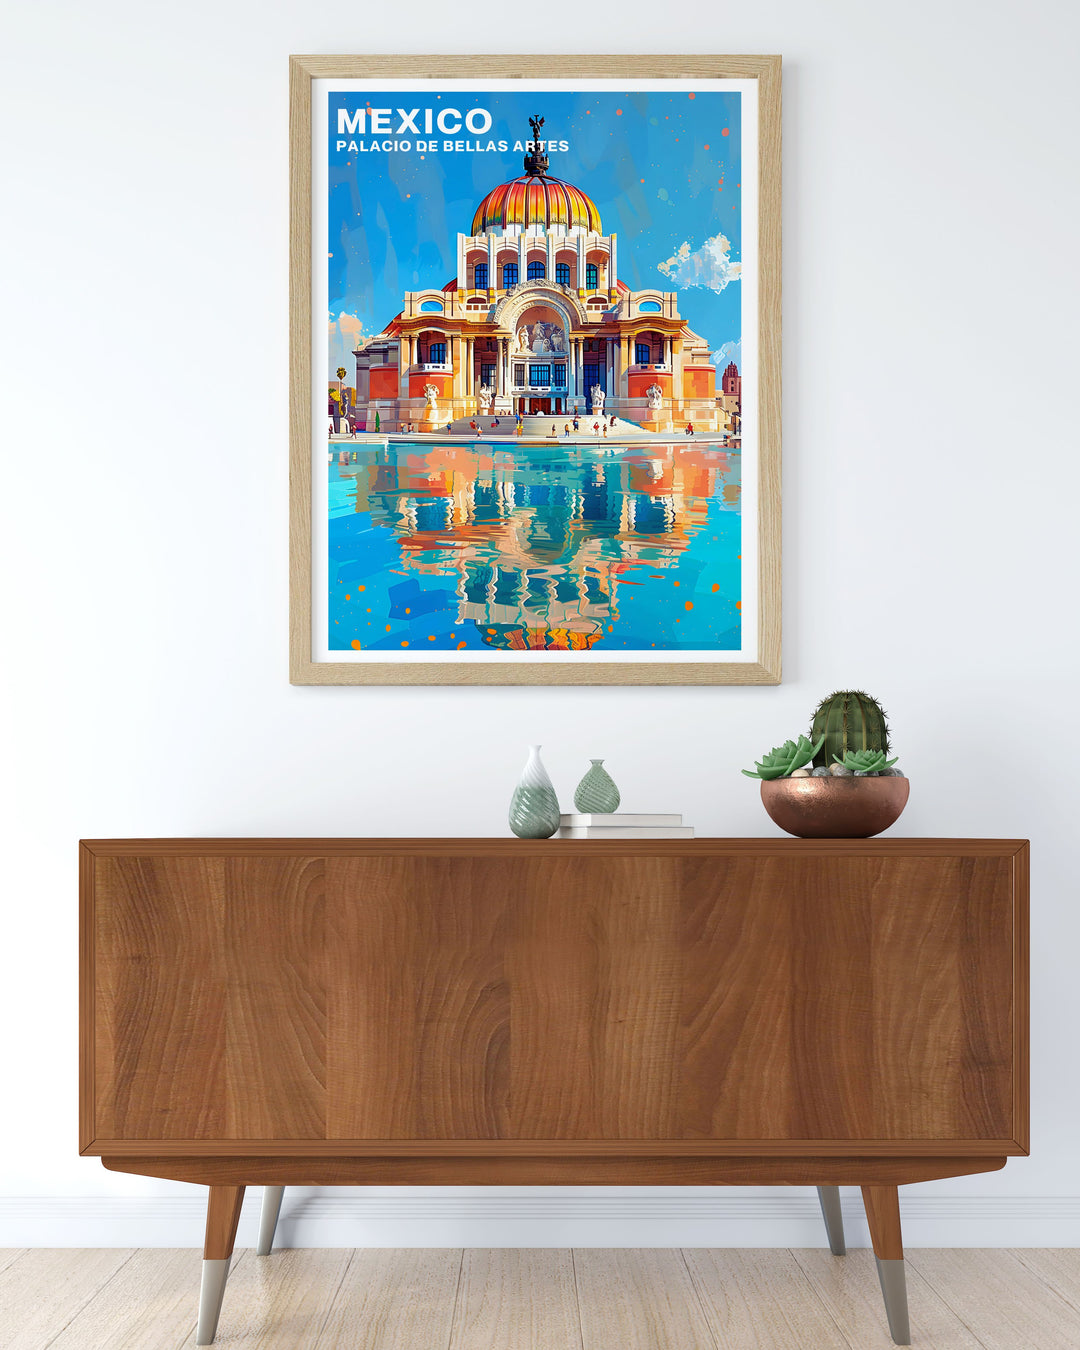 Featuring the stunning architecture of the Palacio de Bellas Artes, this poster offers a visual representation of one of North Americas most beautiful cultural landmarks, ideal for art and history enthusiasts.